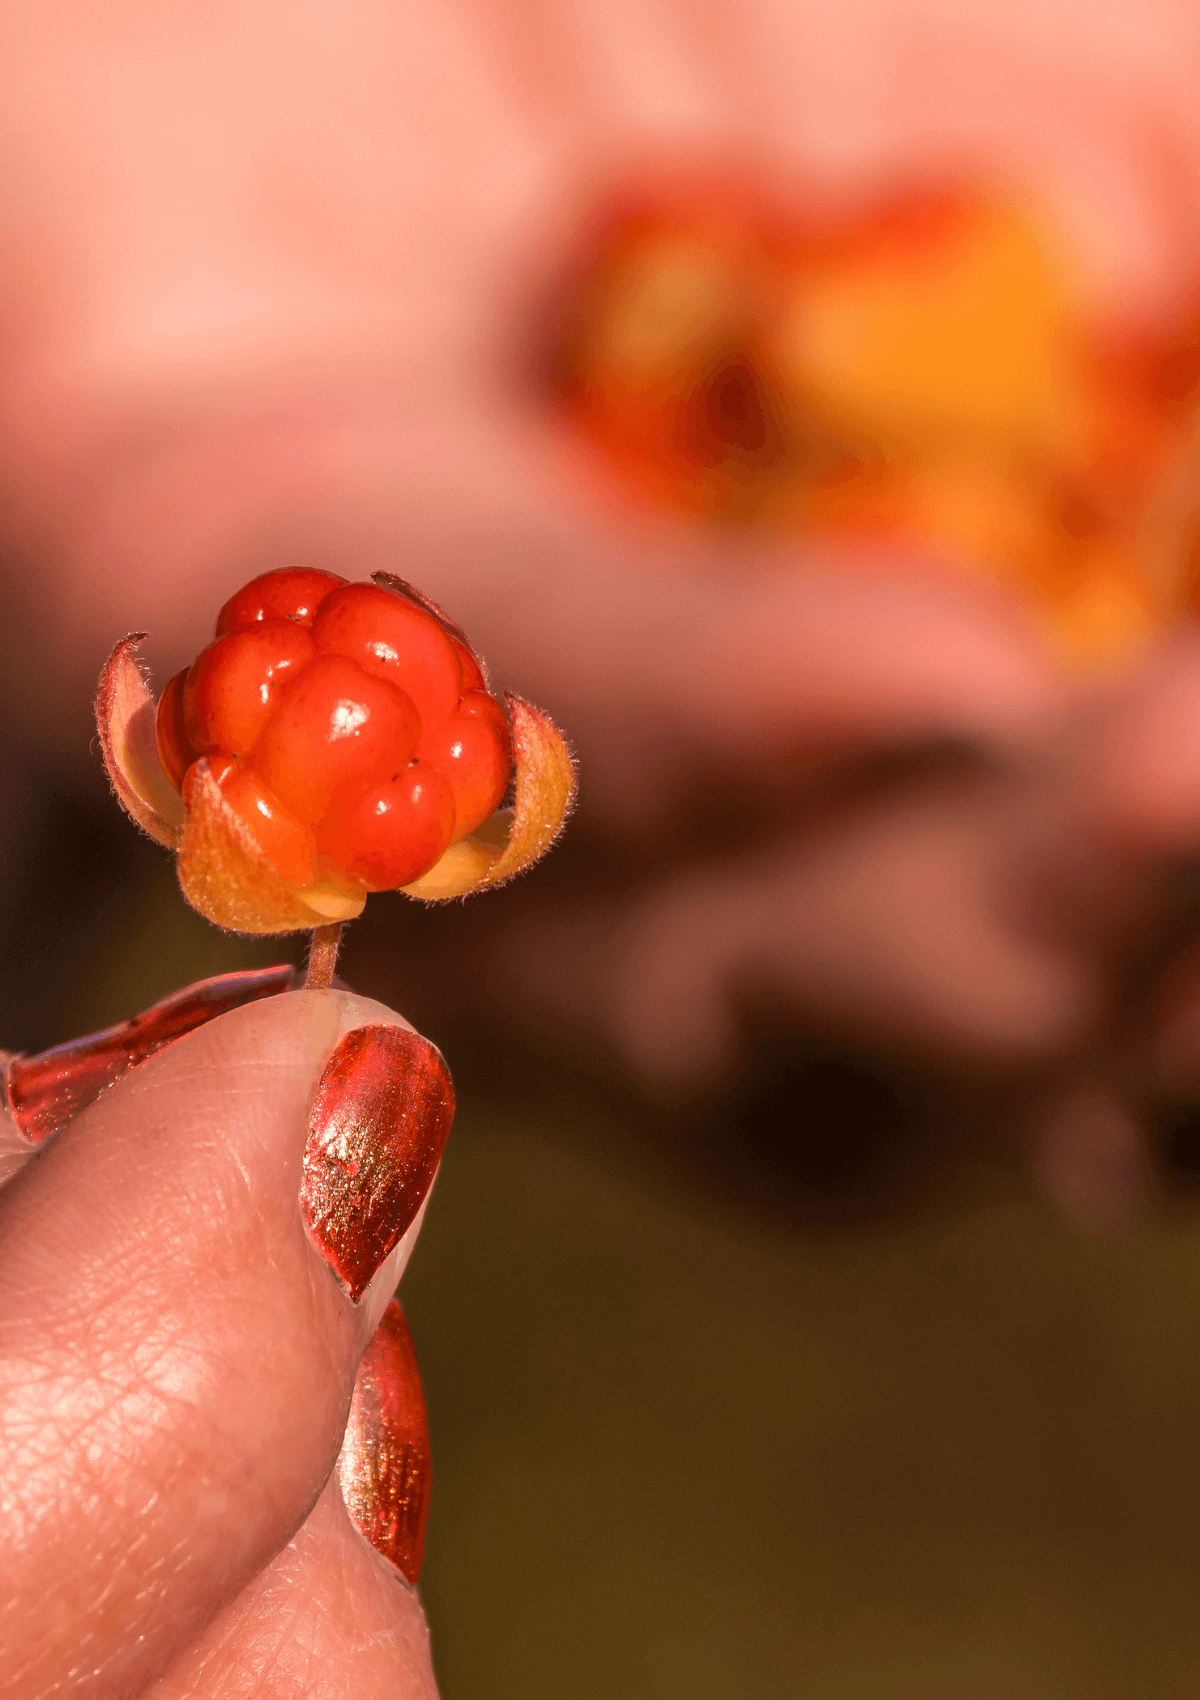 cloudberry picking in Finland provides great souvenir ideas